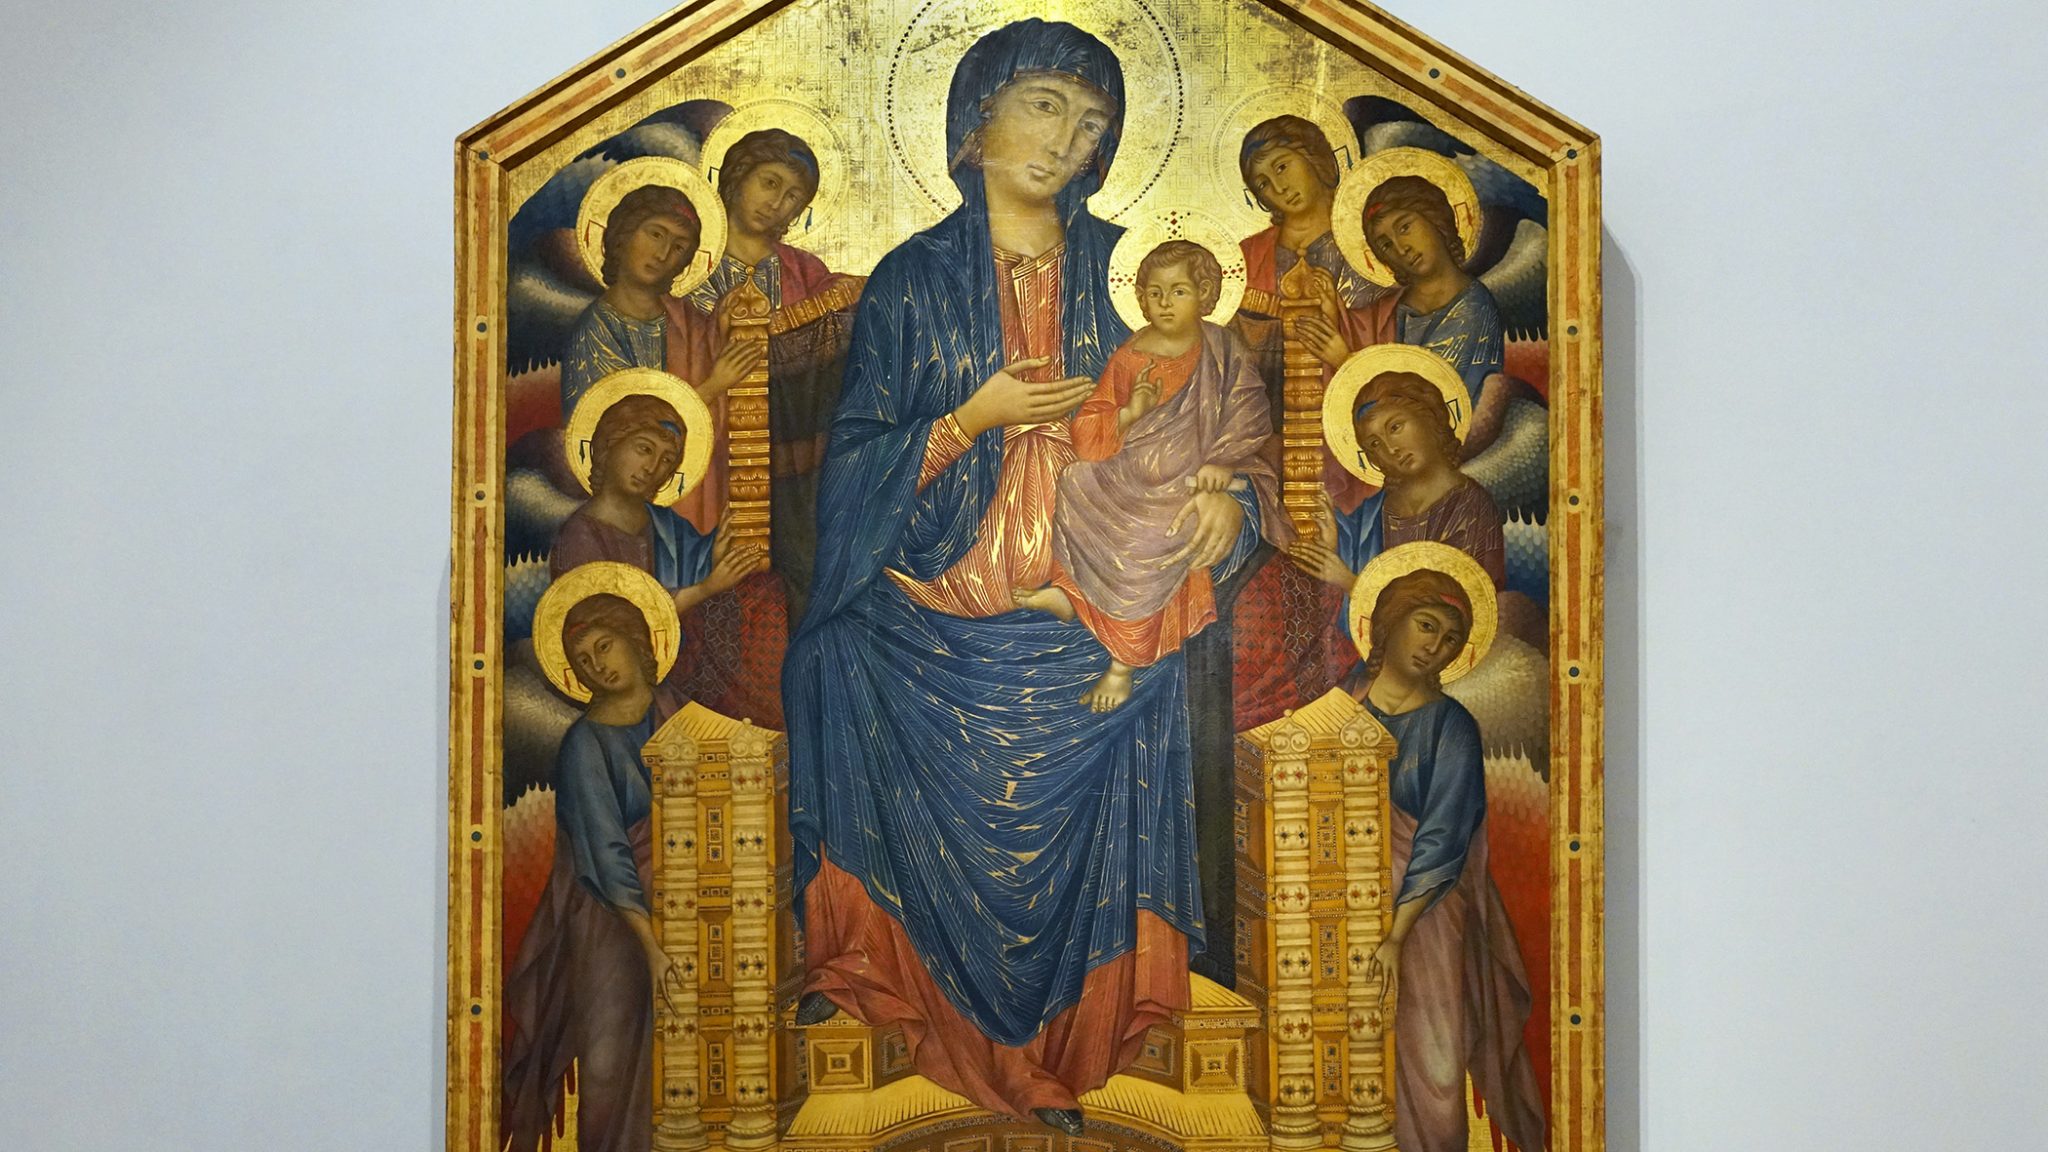 Madonna and Child Enthroned with Saints by Cimabue, 1280-1285